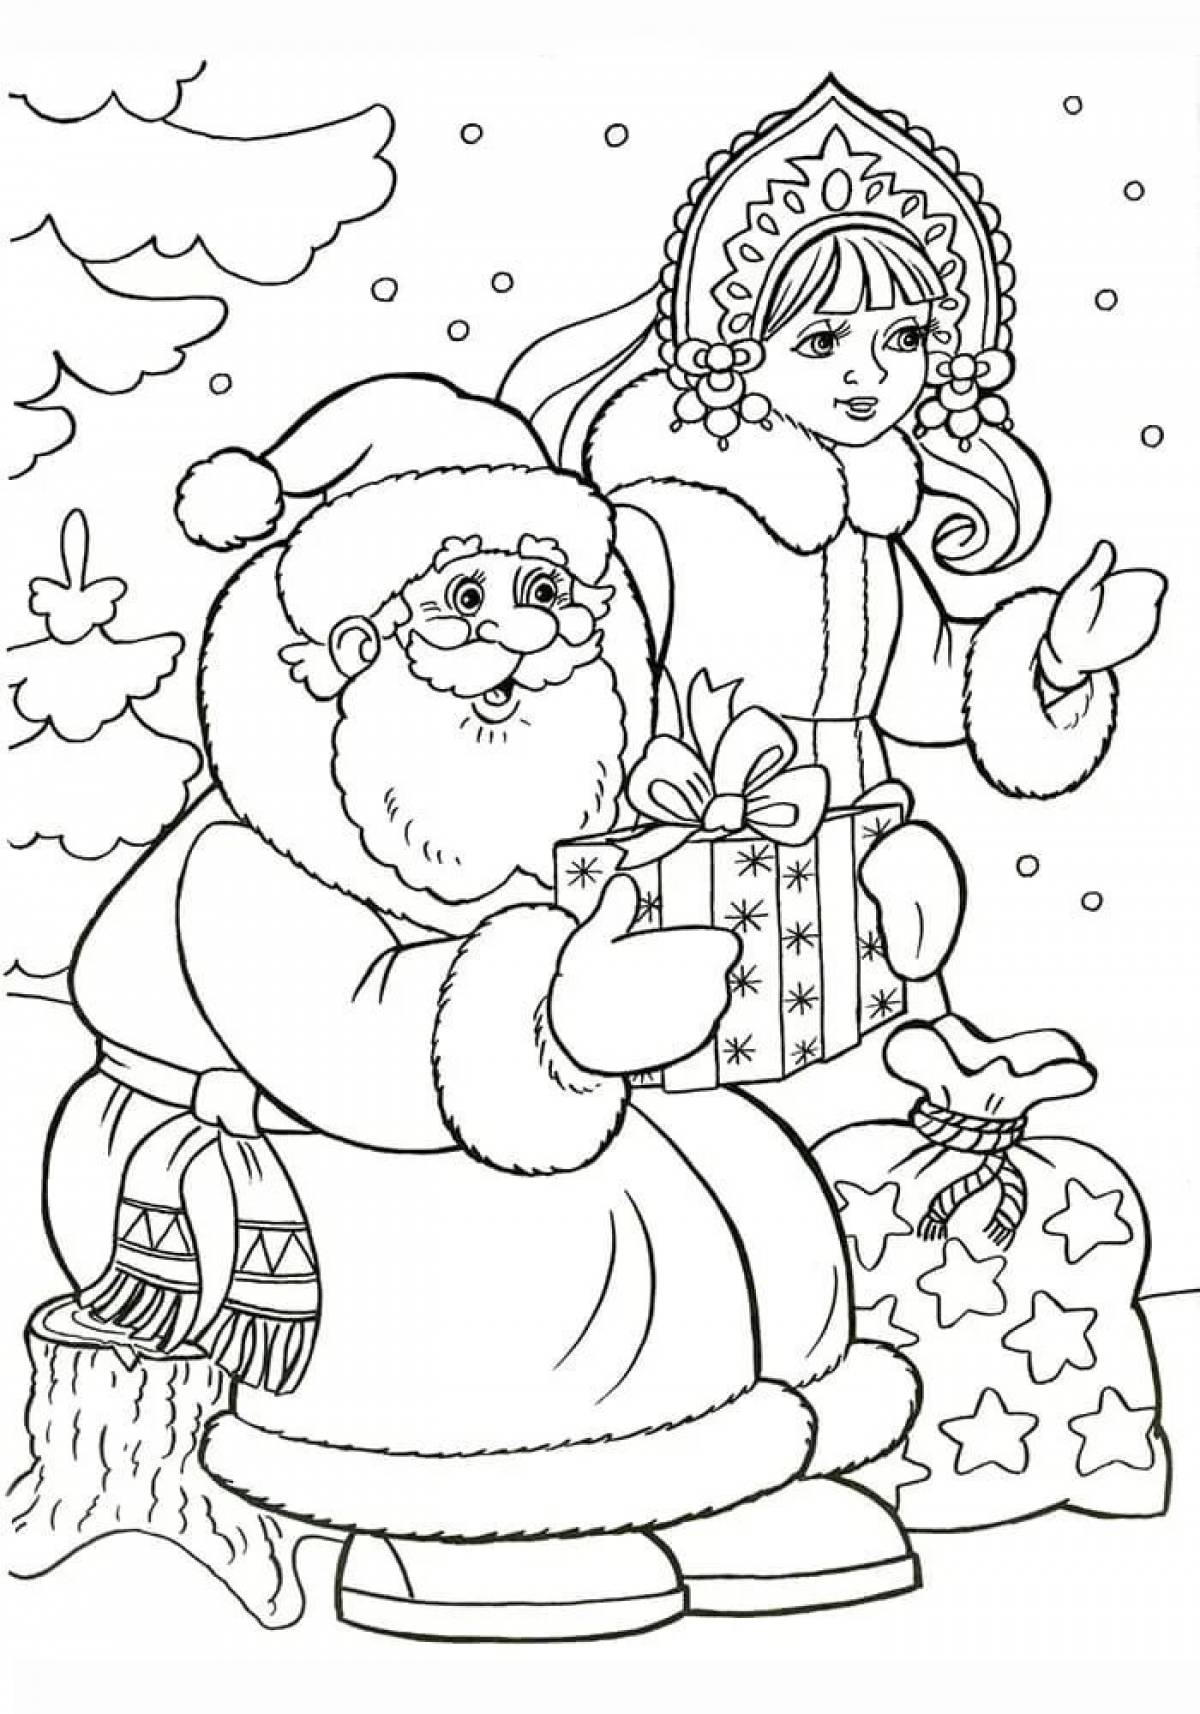 Santa Claus and Snow Maiden for children 3 4 years old #11